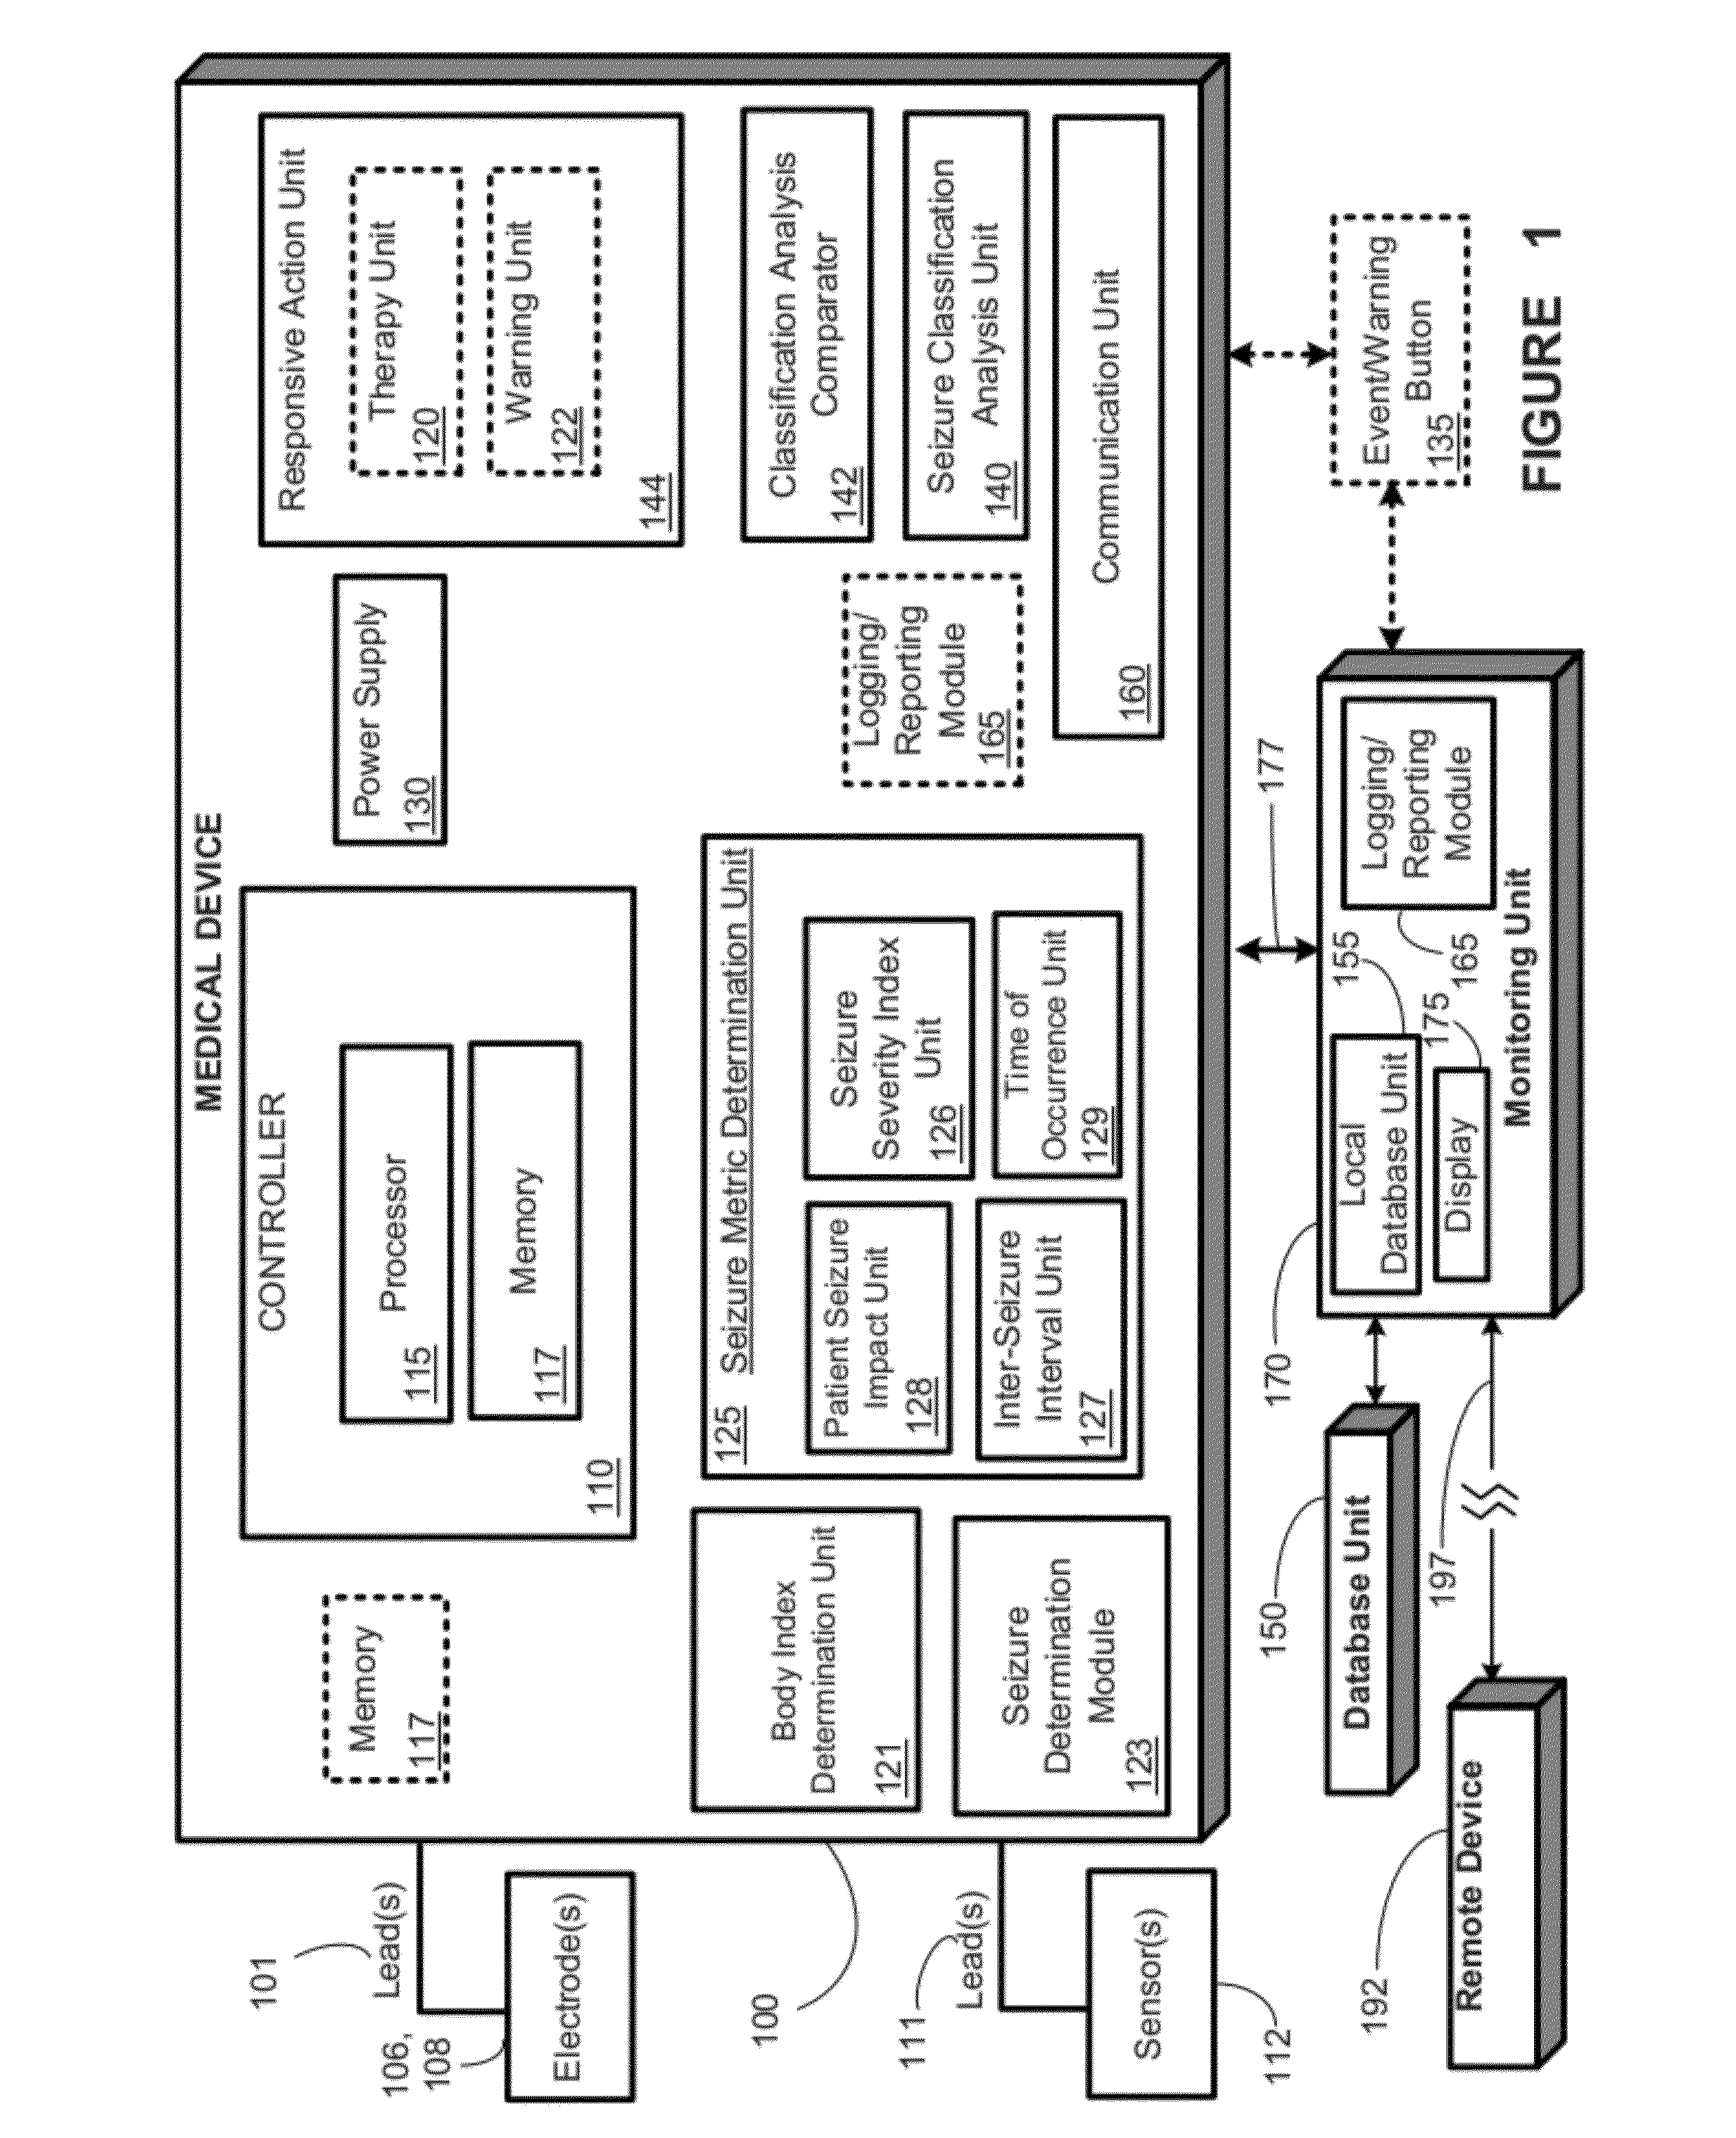 Detecting, Assessing and Managing Epilepsy Using a Multi-Variate, Metric-Based Classification Analysis